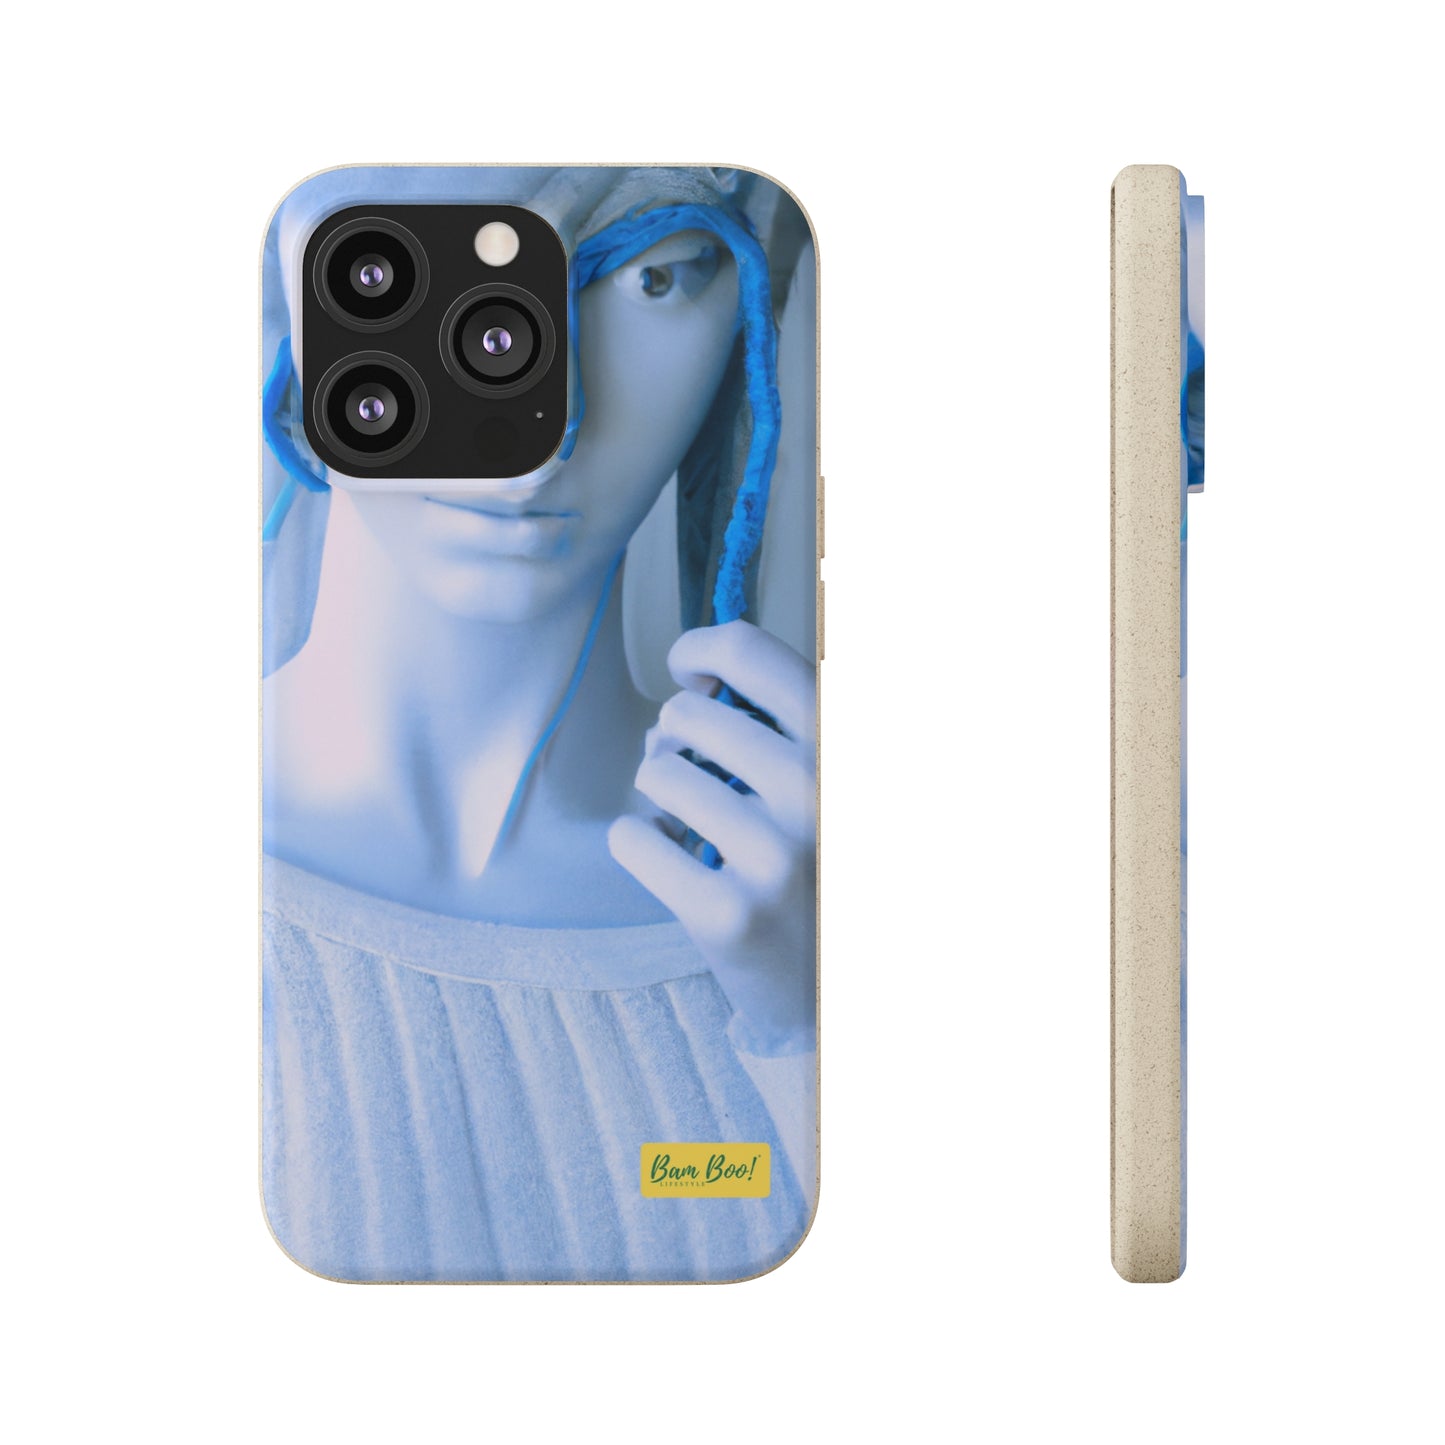 "My Reflection: Capturing What Matters Most" - Bam Boo! Lifestyle Eco-friendly Cases